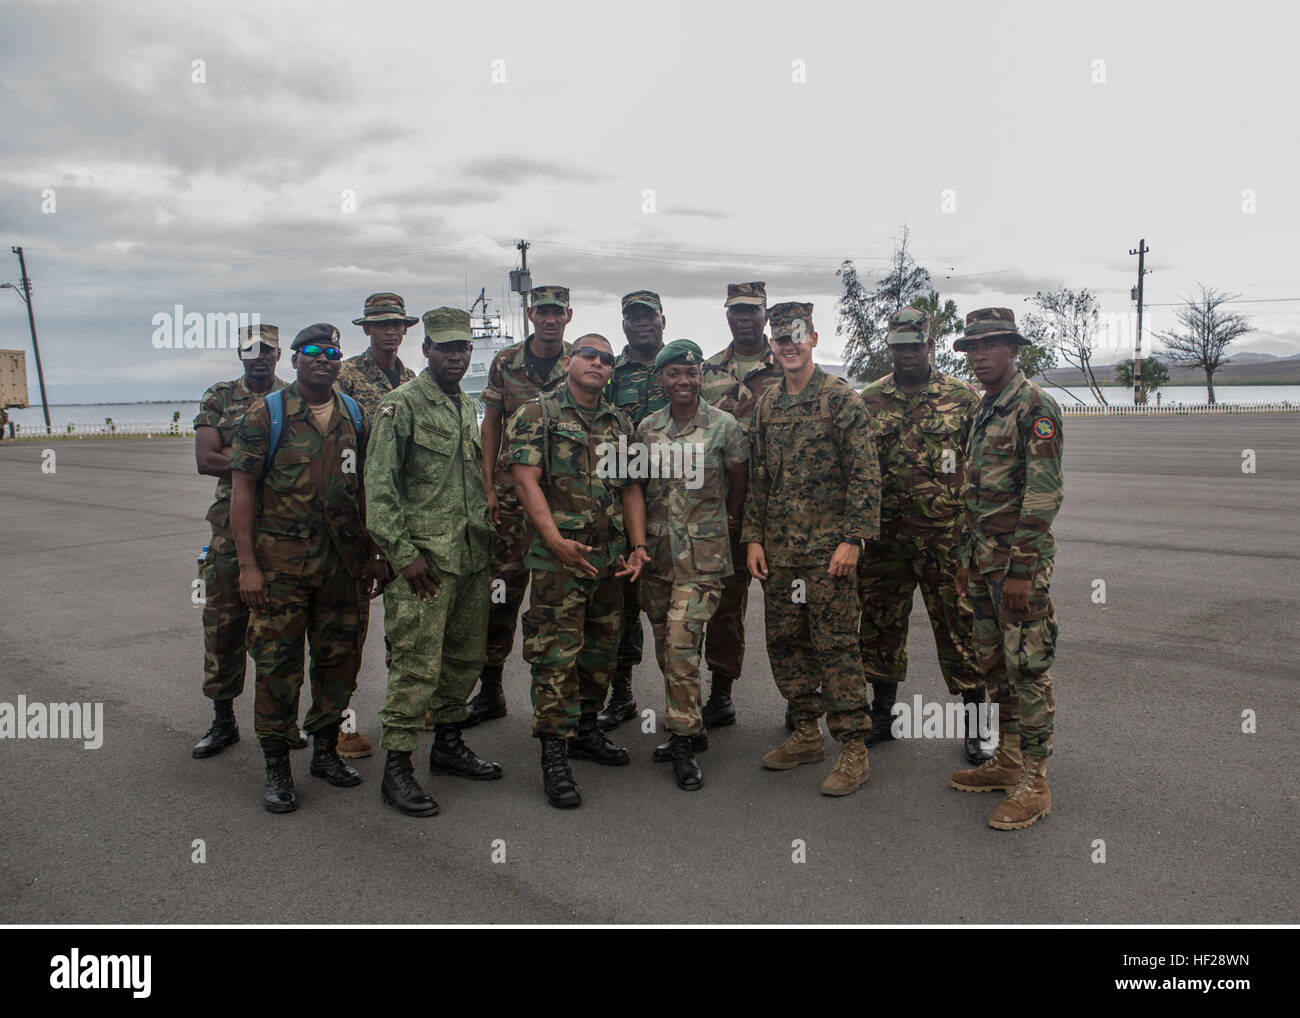 Members of Team one pose for a photograph at the end of the squad competition to mark the final training day of the joint and combined exercise. Twelve teams comprised by one member of each partner nation competed for bragging rights in events like interior urban tactics training, interior close quarter battles and room clearings portion of the combined group competitions during Tradewinds 2014 aboard Dominican Naval Base, Las Calderas, located near Bani, Dominican Republic, June 24, 2014. U.S. Marines with Charley Company, 4th Law Enforcement Battalion, Marine Forces Reserve, and soldiers wit Stock Photo